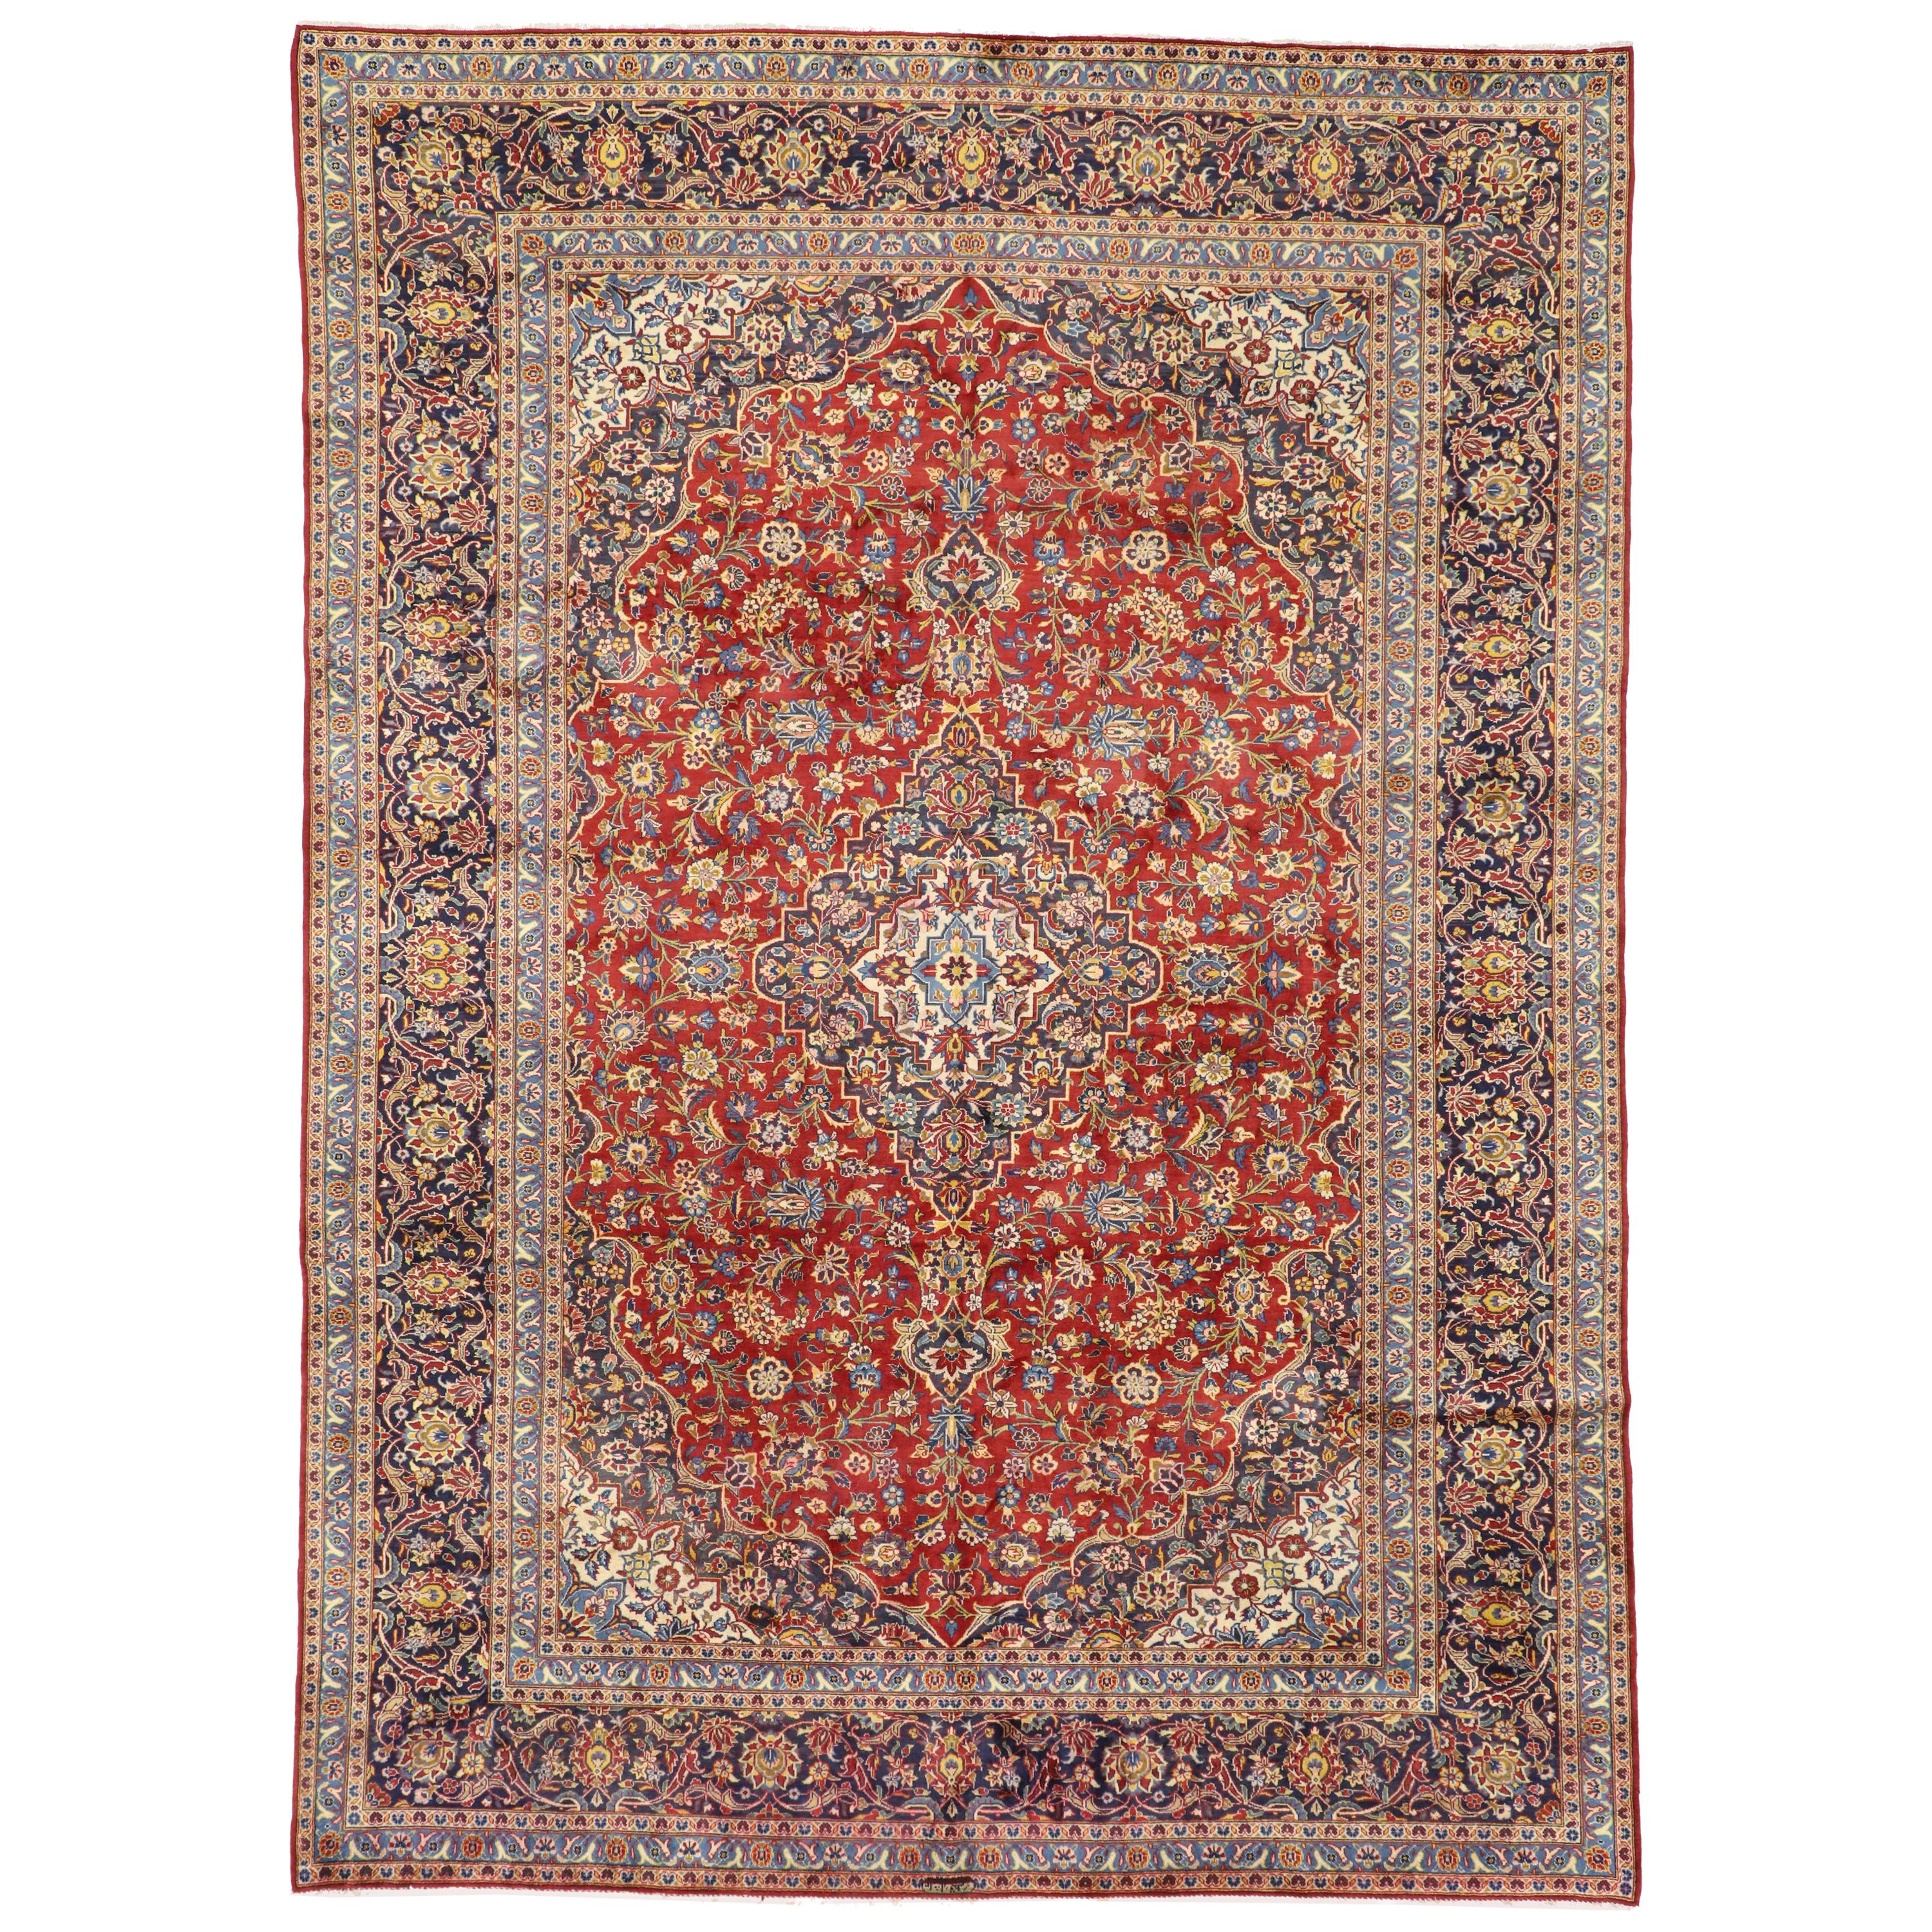 Vintage Persian Kashan Area Rug with Neoclassical Style